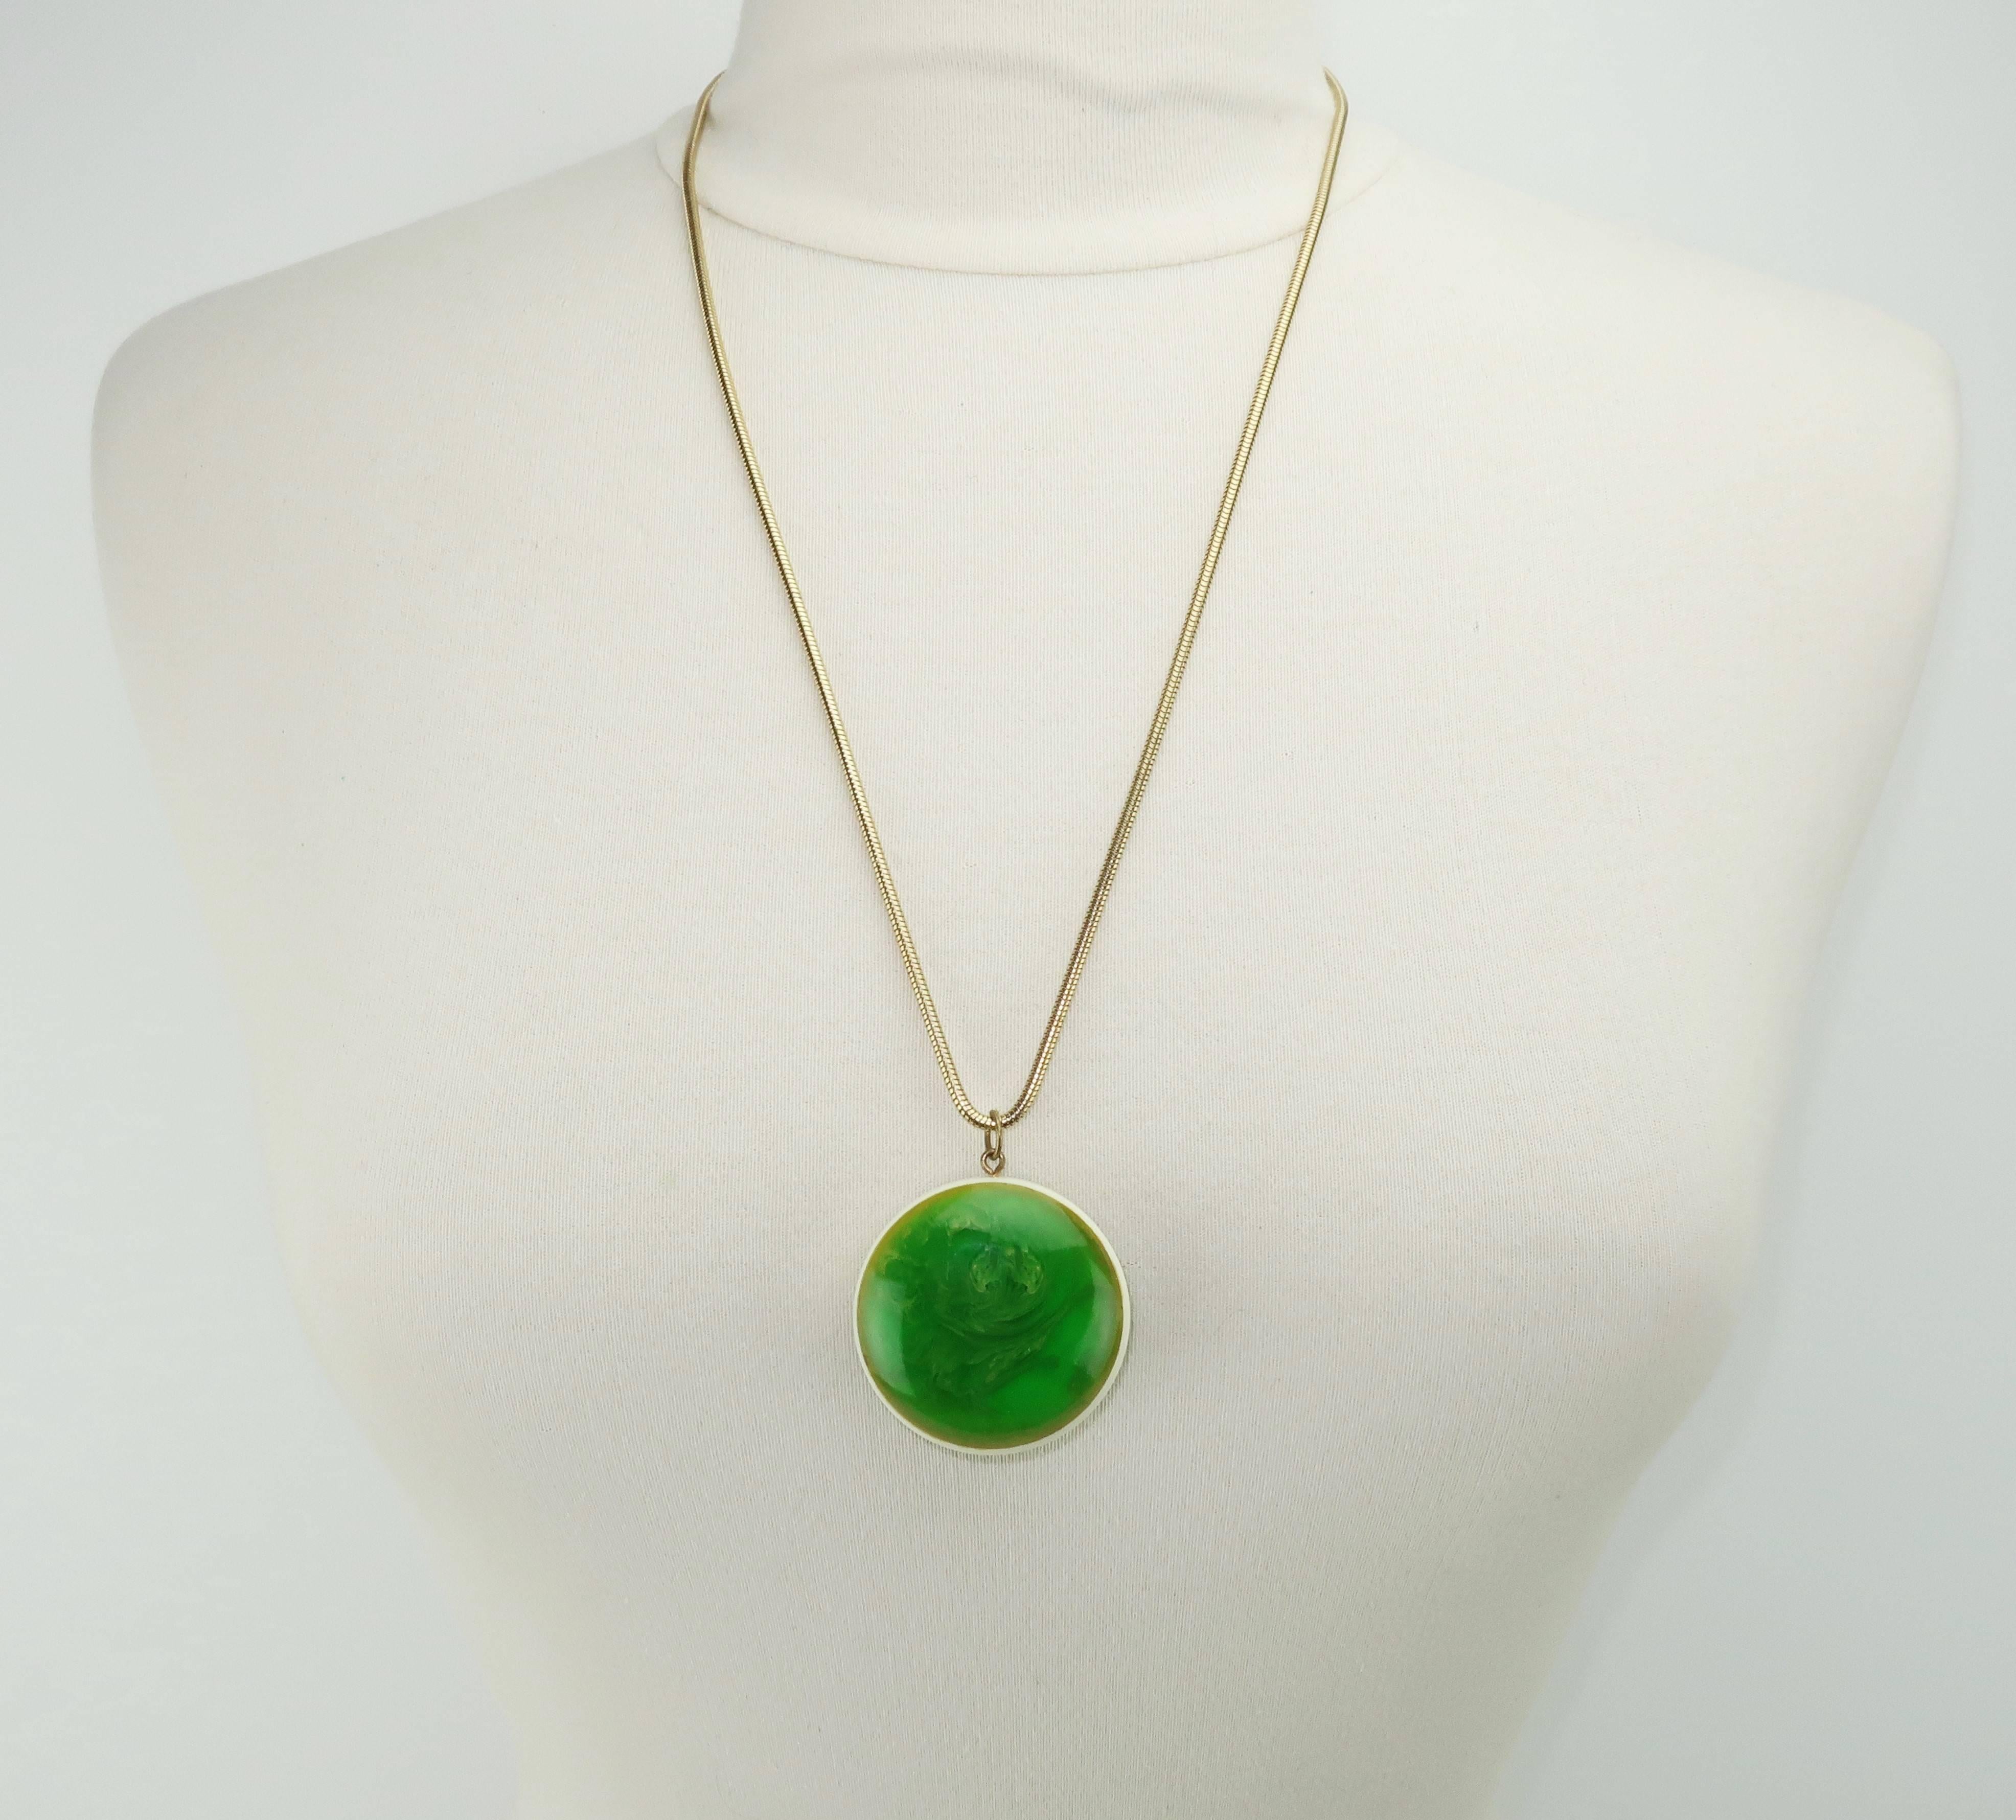 Modernist Mod Green Marbled Acrylic Pendant Necklace, circa 1970 